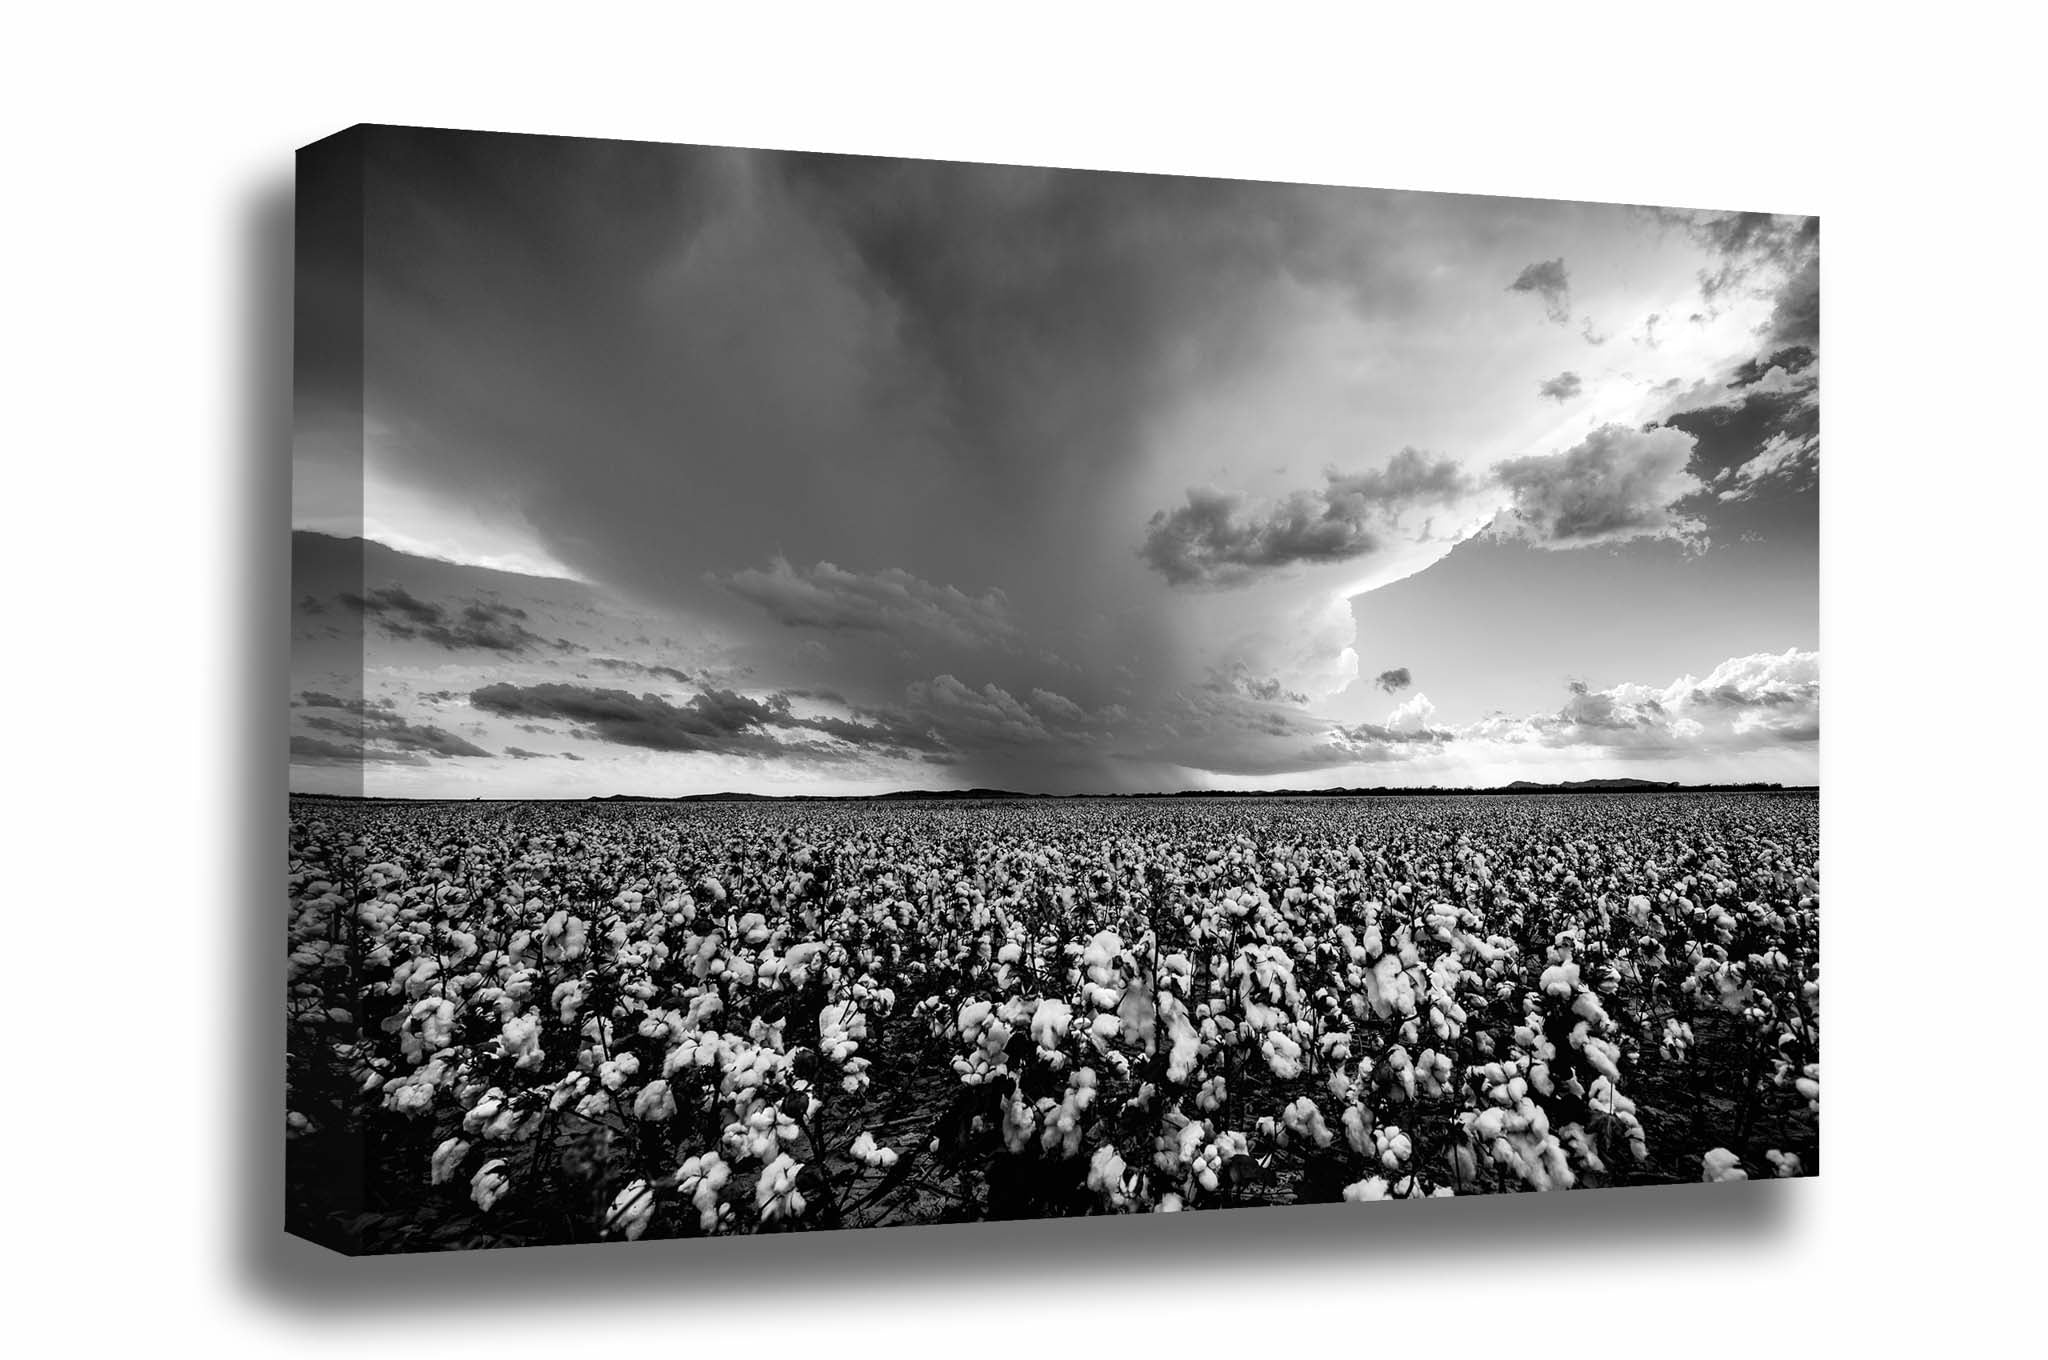 Country canvas wall art of a thunderstorm brewing over a cotton field on a late summer day in Oklahoma in black and white by Sean Ramsey of Southern Plains Photography.